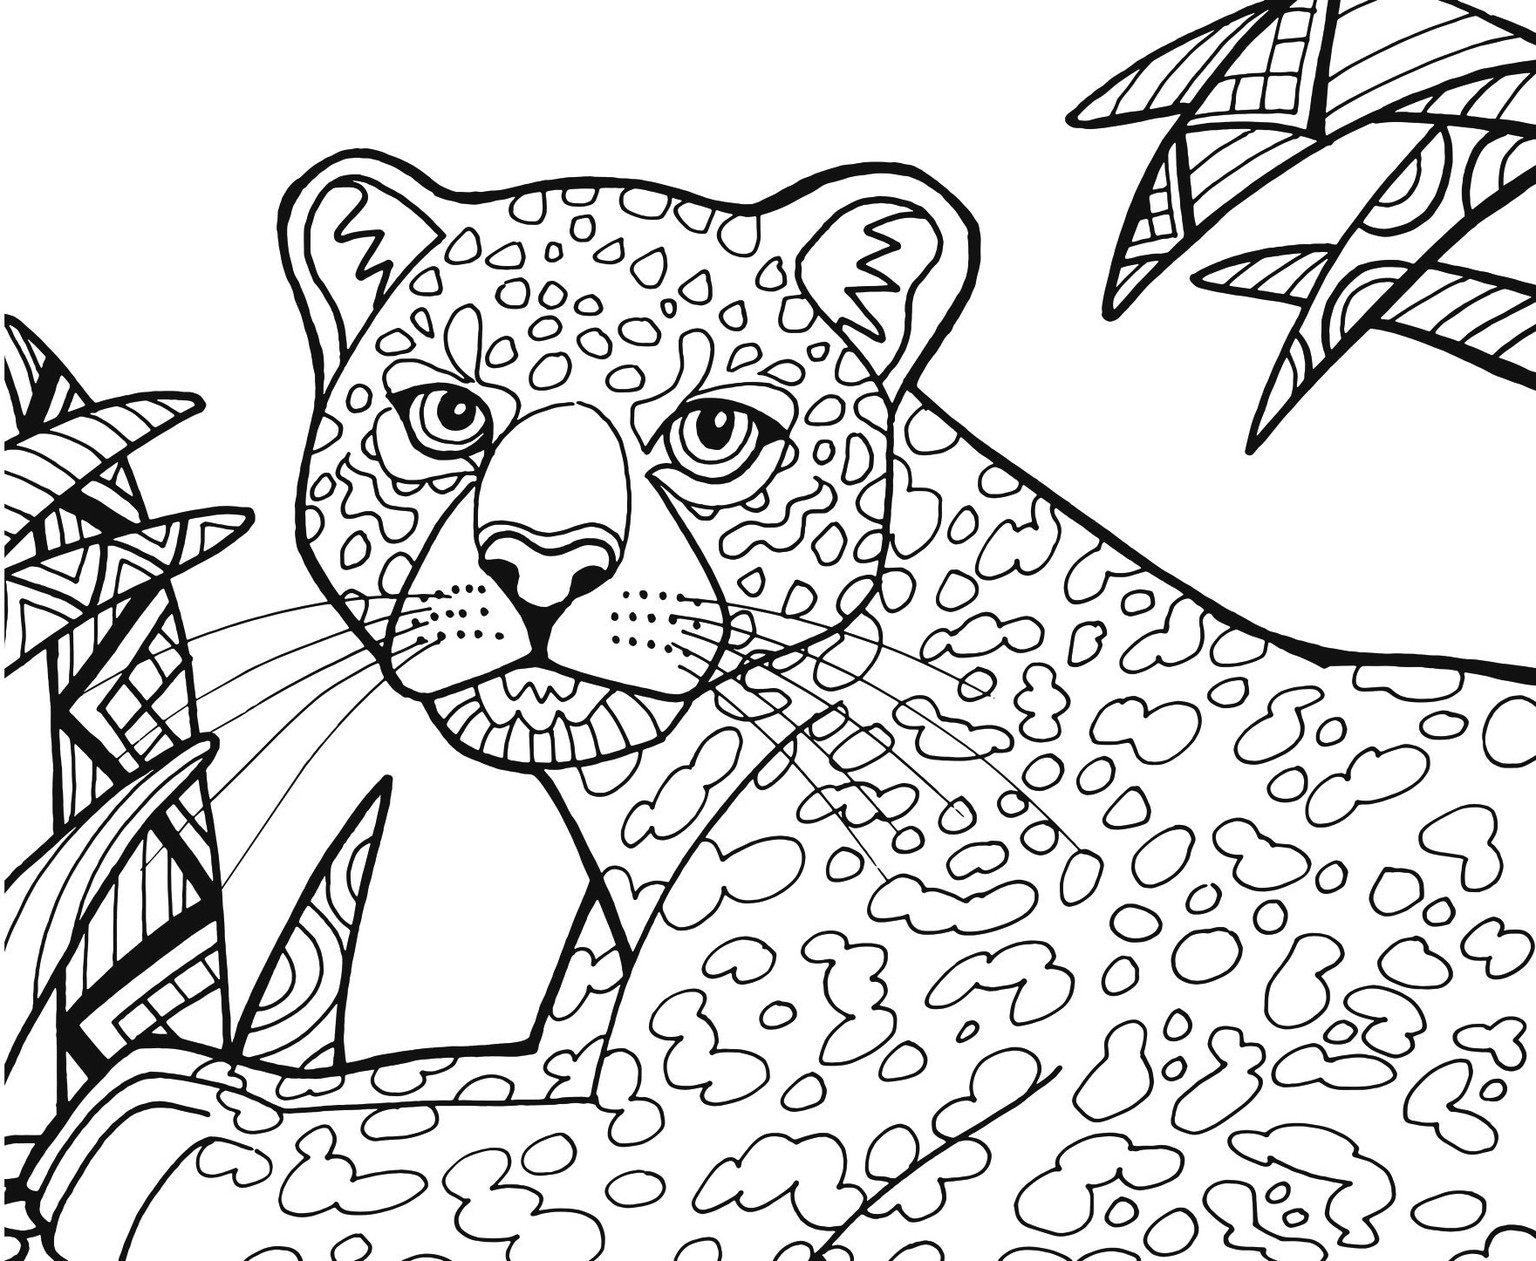 Freebie Friday 11-15-19 Cats, Kittens and Wildcats Coloring Page